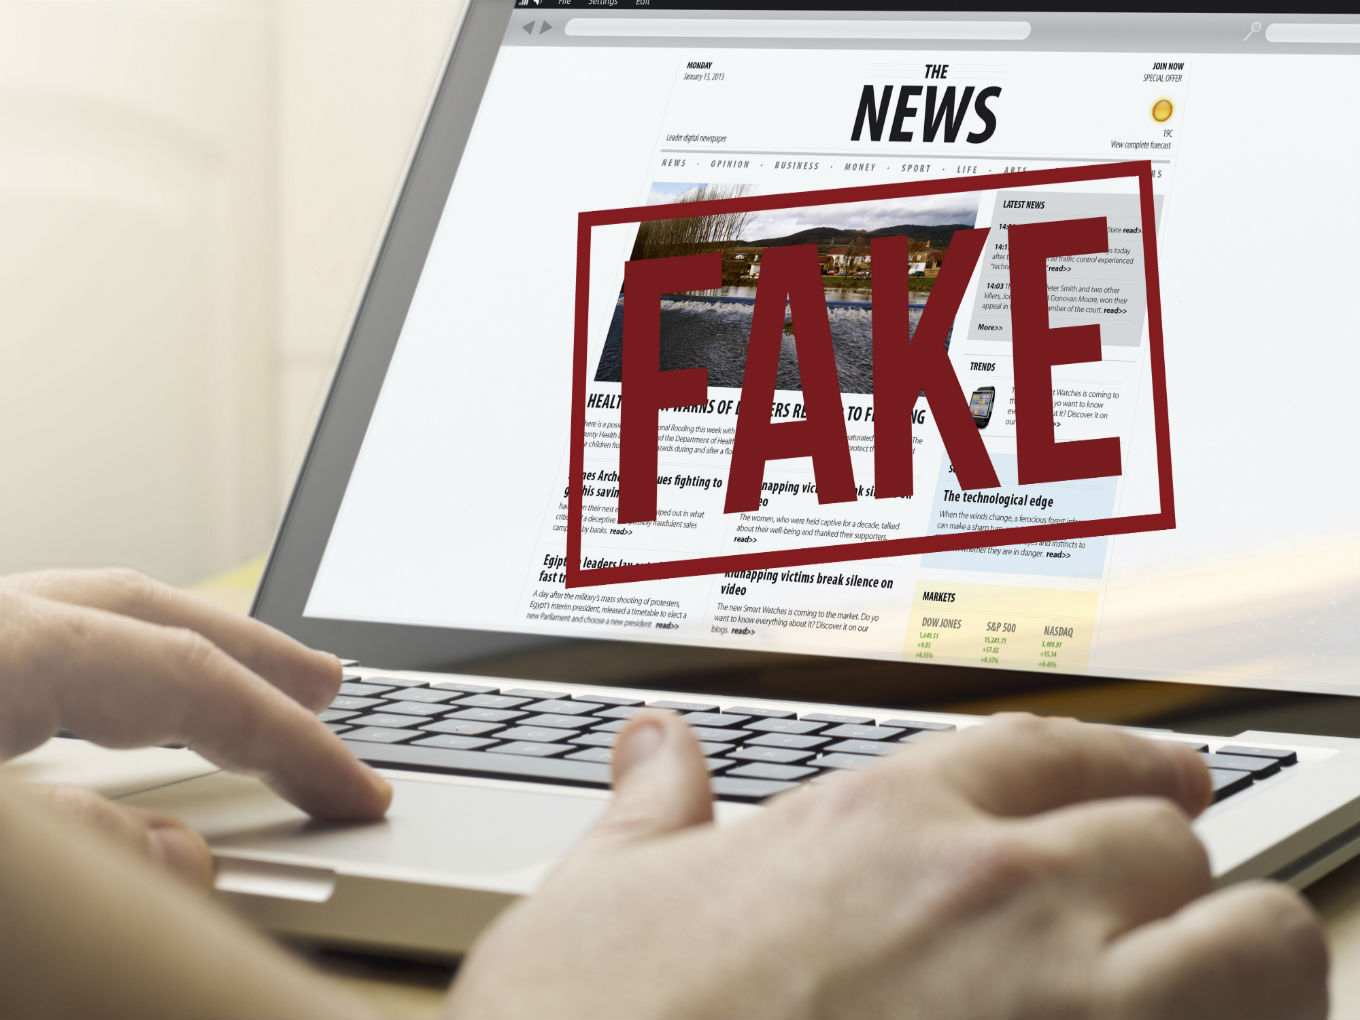 Indian Govt Directs Social Media Companies To Monitor Rumours, Fake News